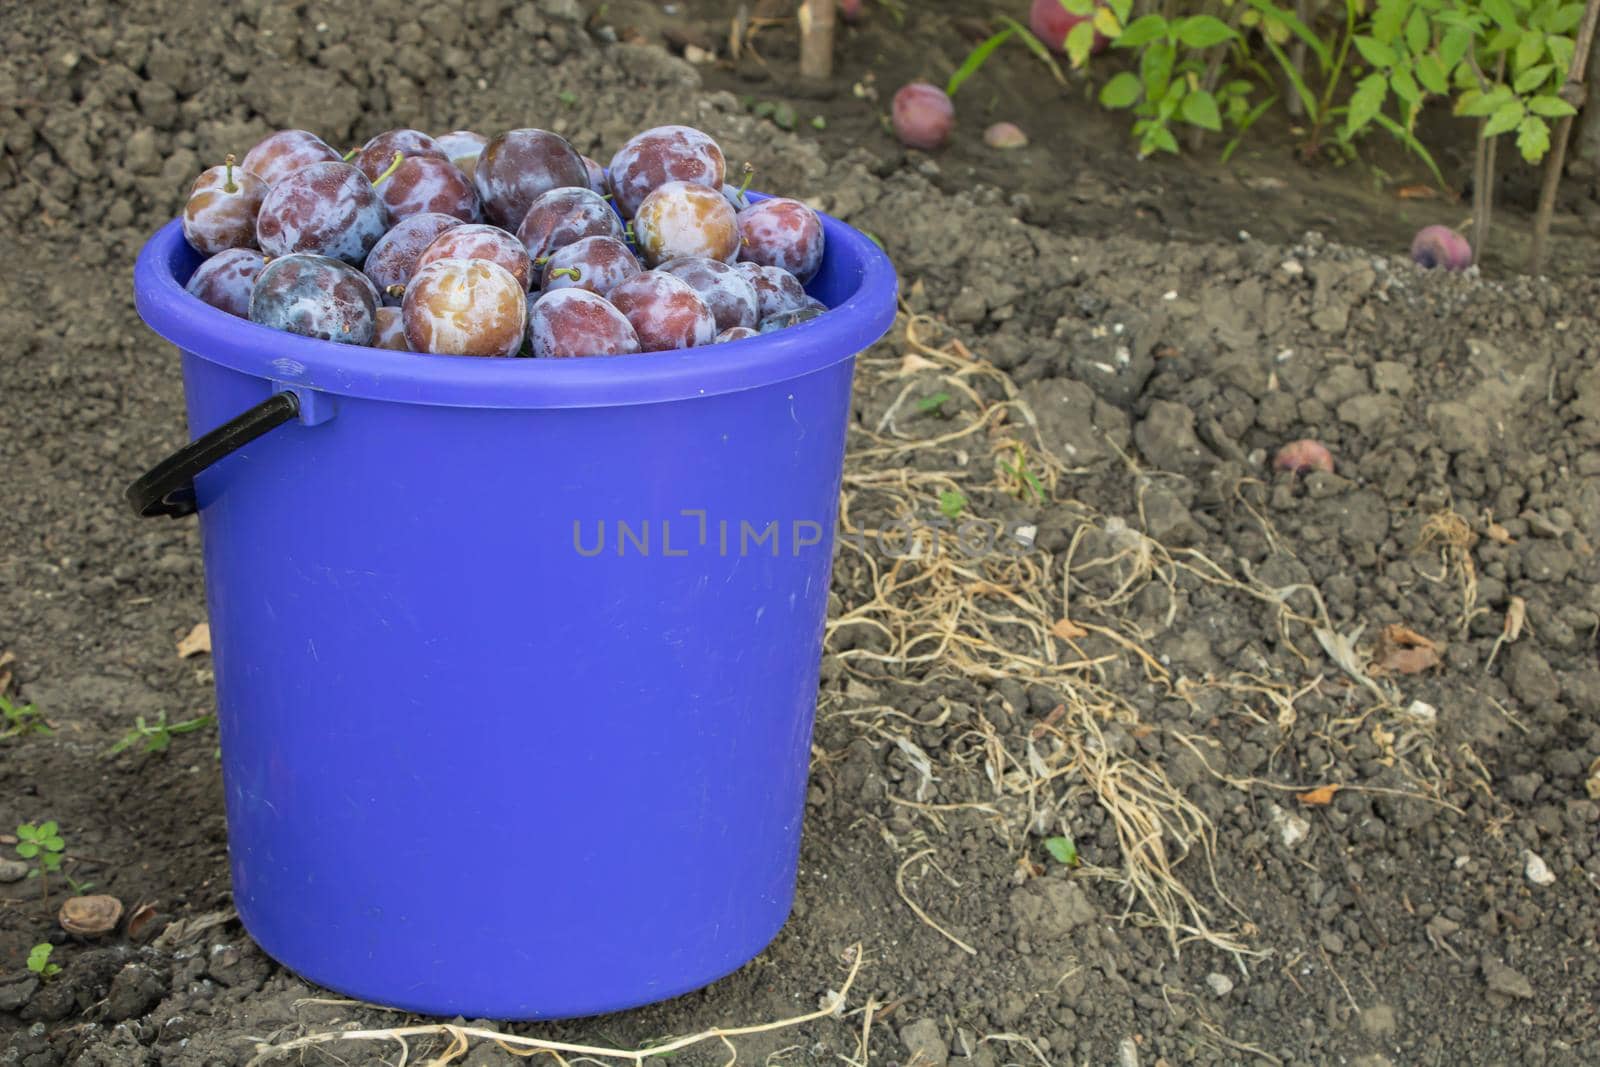 A bucket full of fresh plums in the garden.